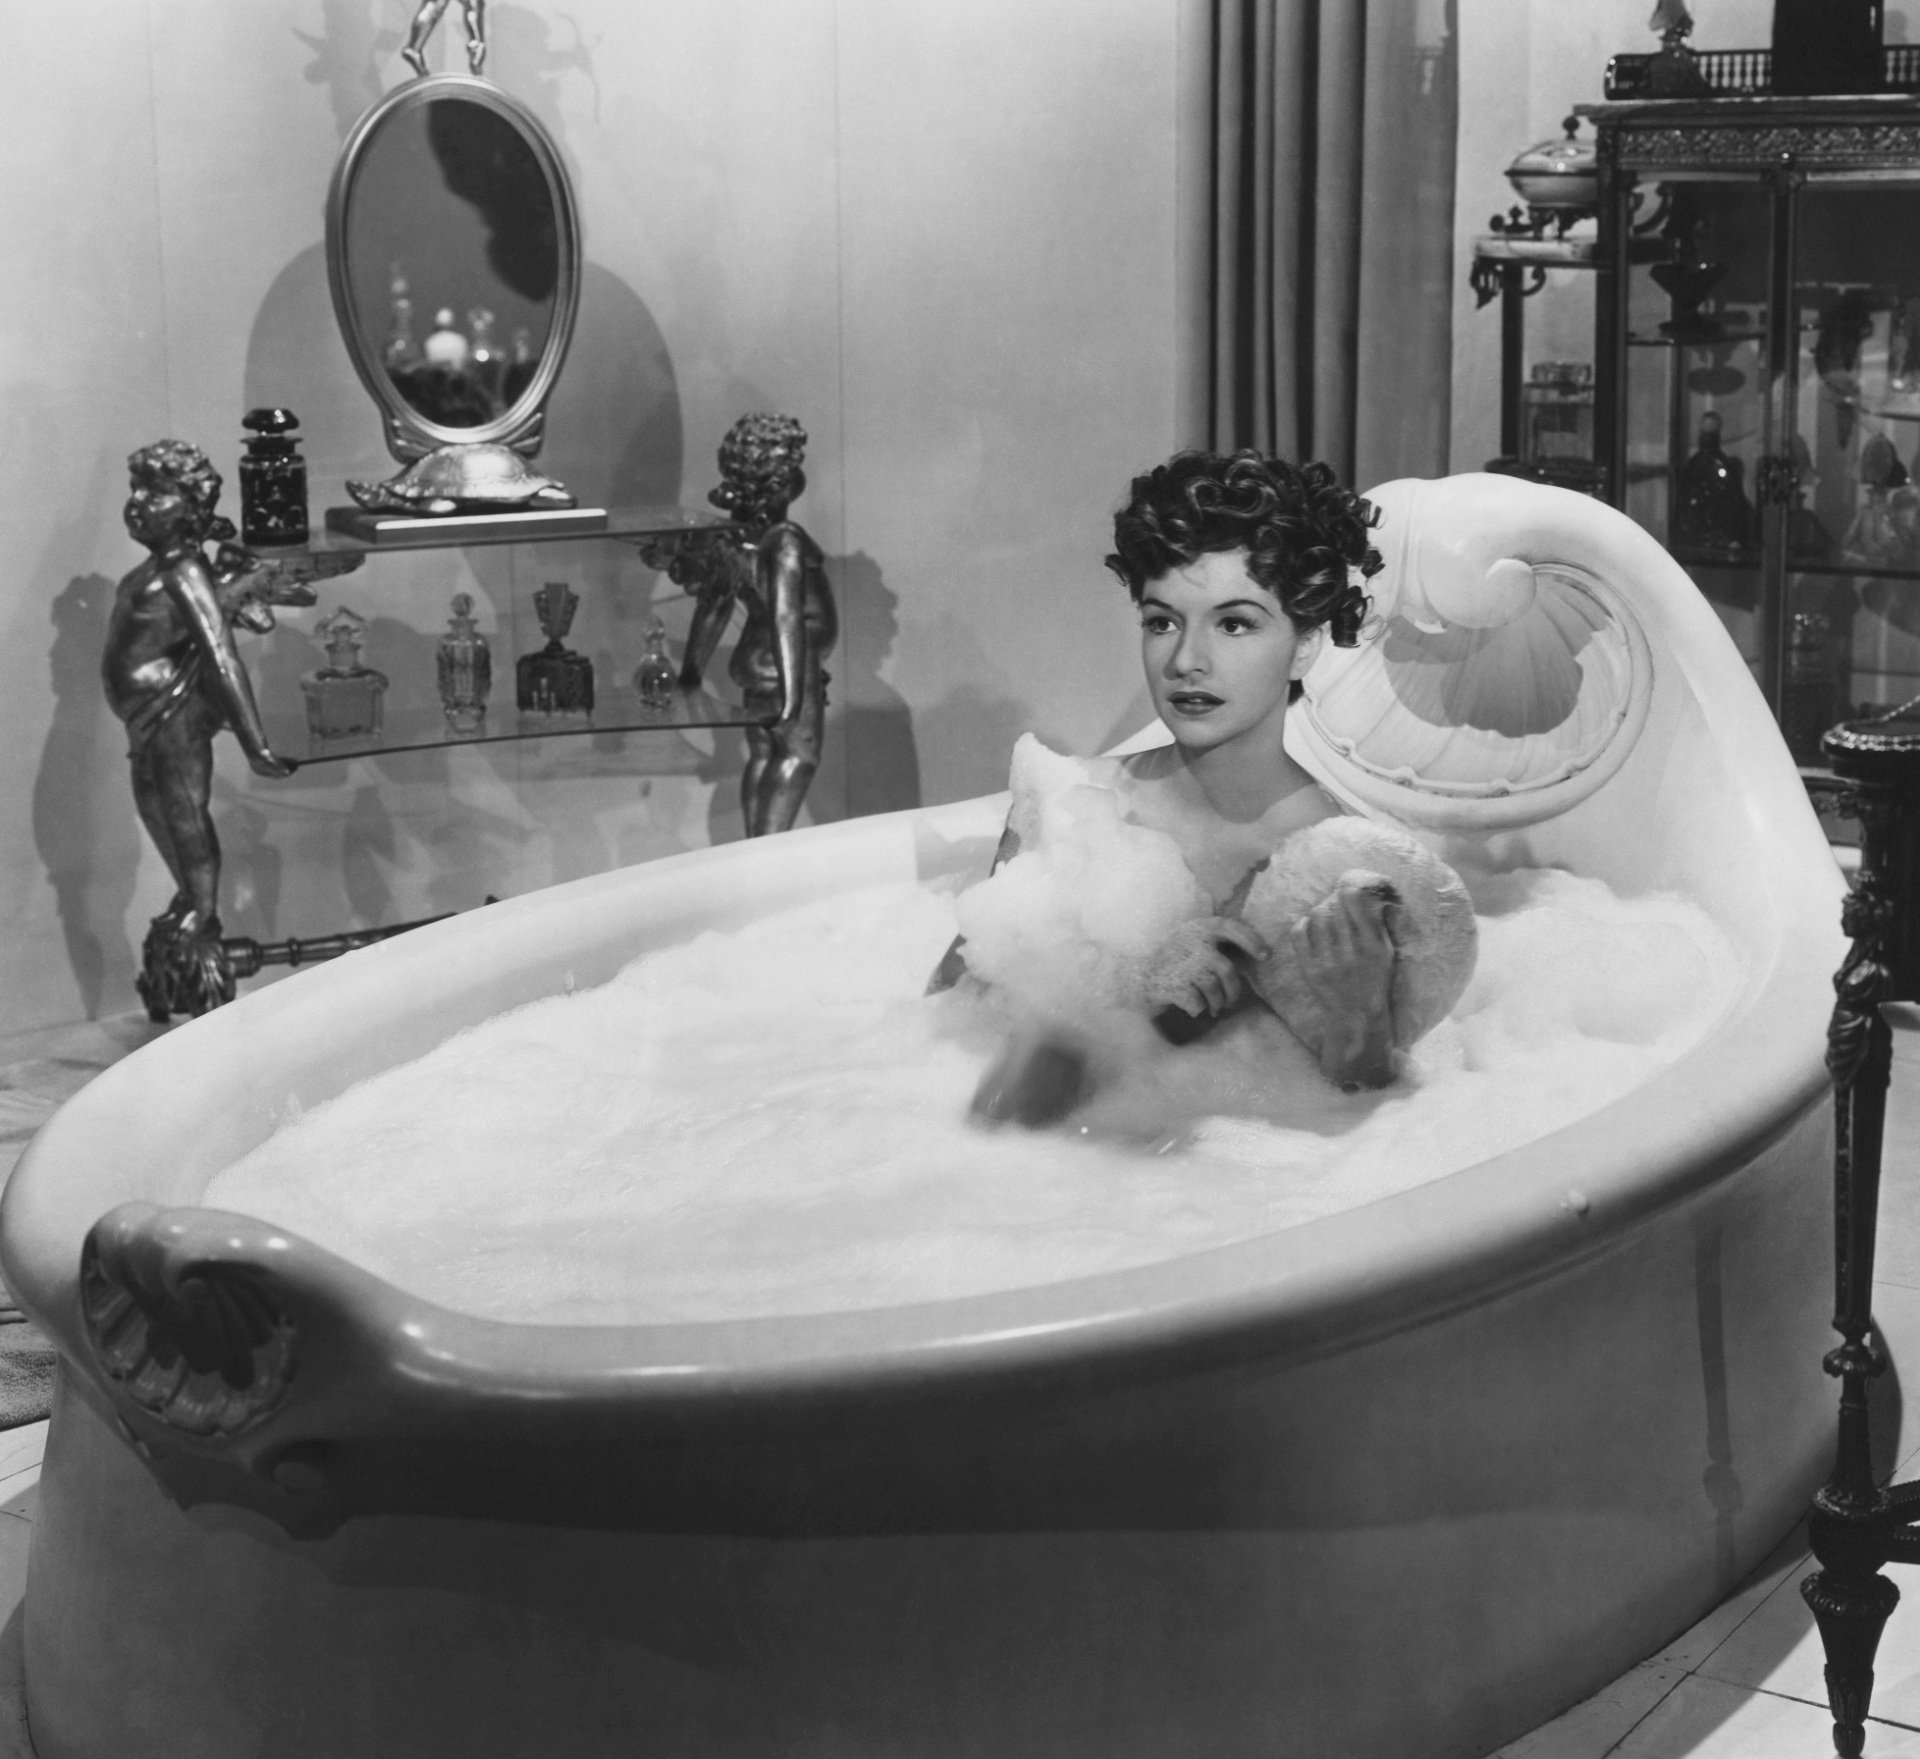 The Origins of National Bubble Bath Day